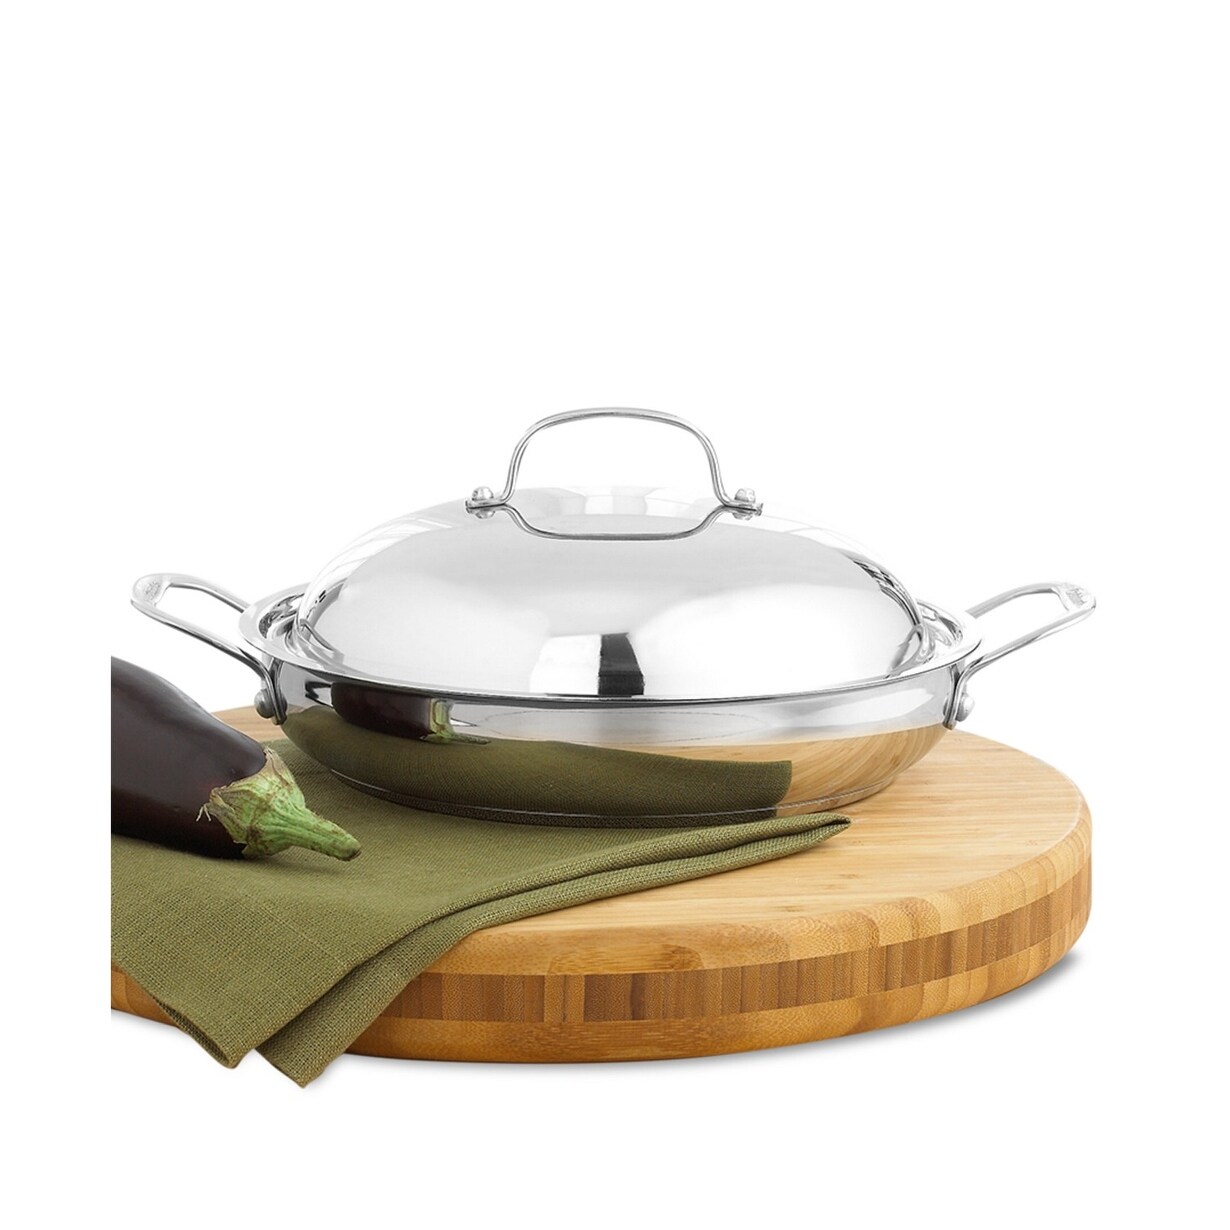 Cuisinart MCP22-30HCN MultiClad Pro Skillet with Helper and Cover 12-Inch